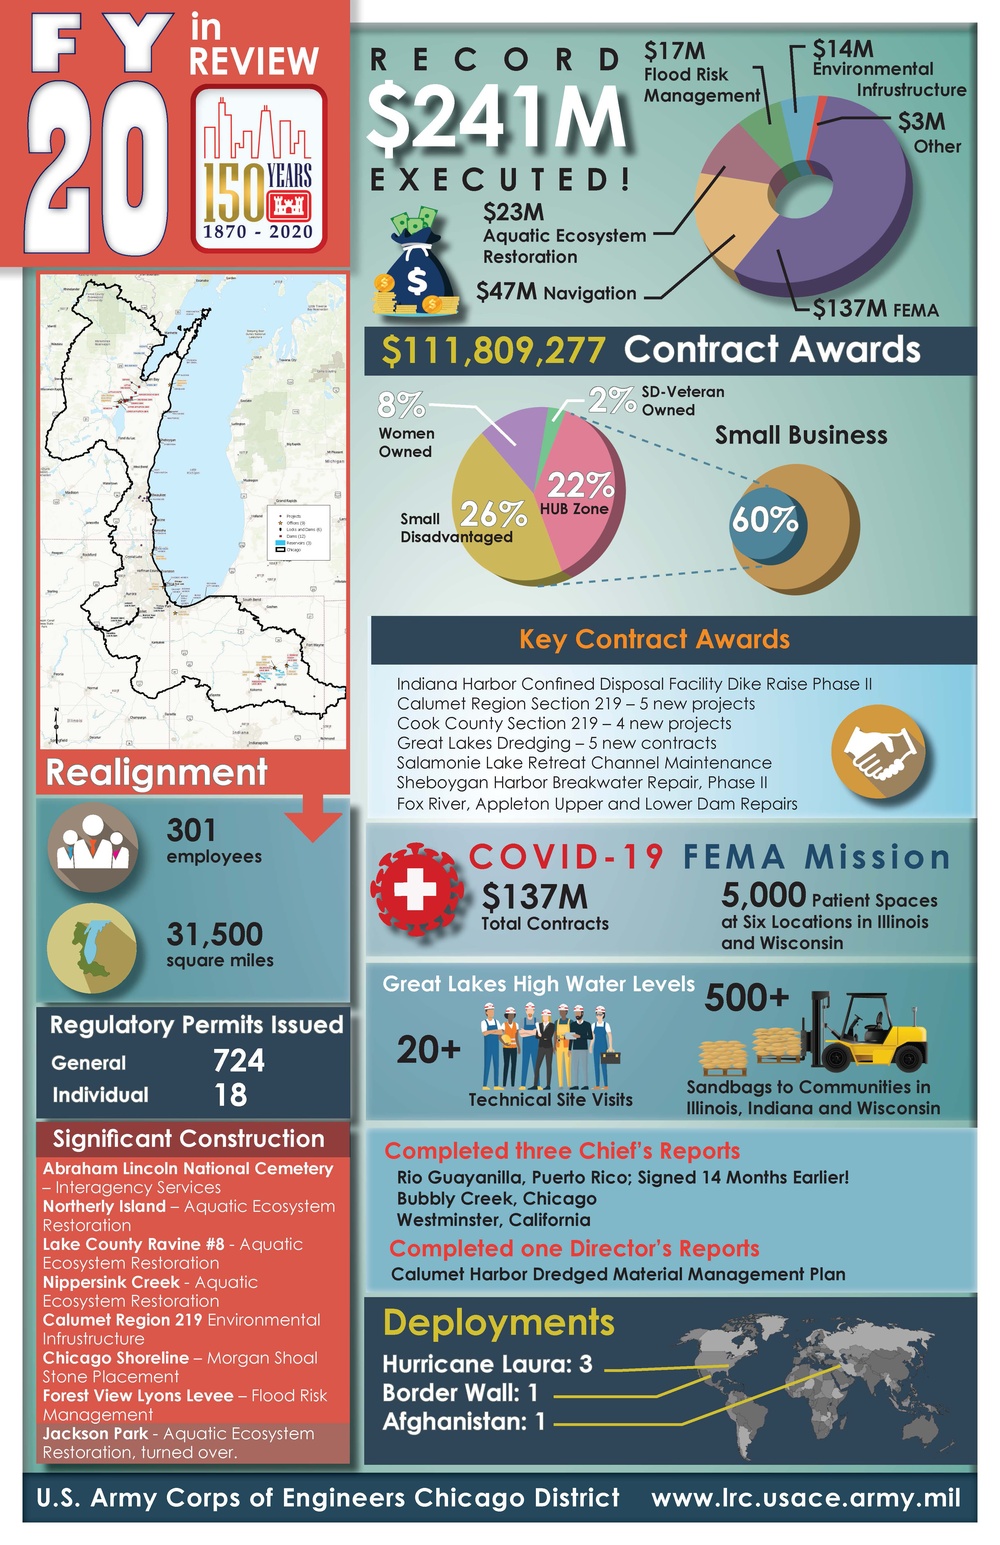 USACE Chicago District completes record-breaking fiscal year with $241M program